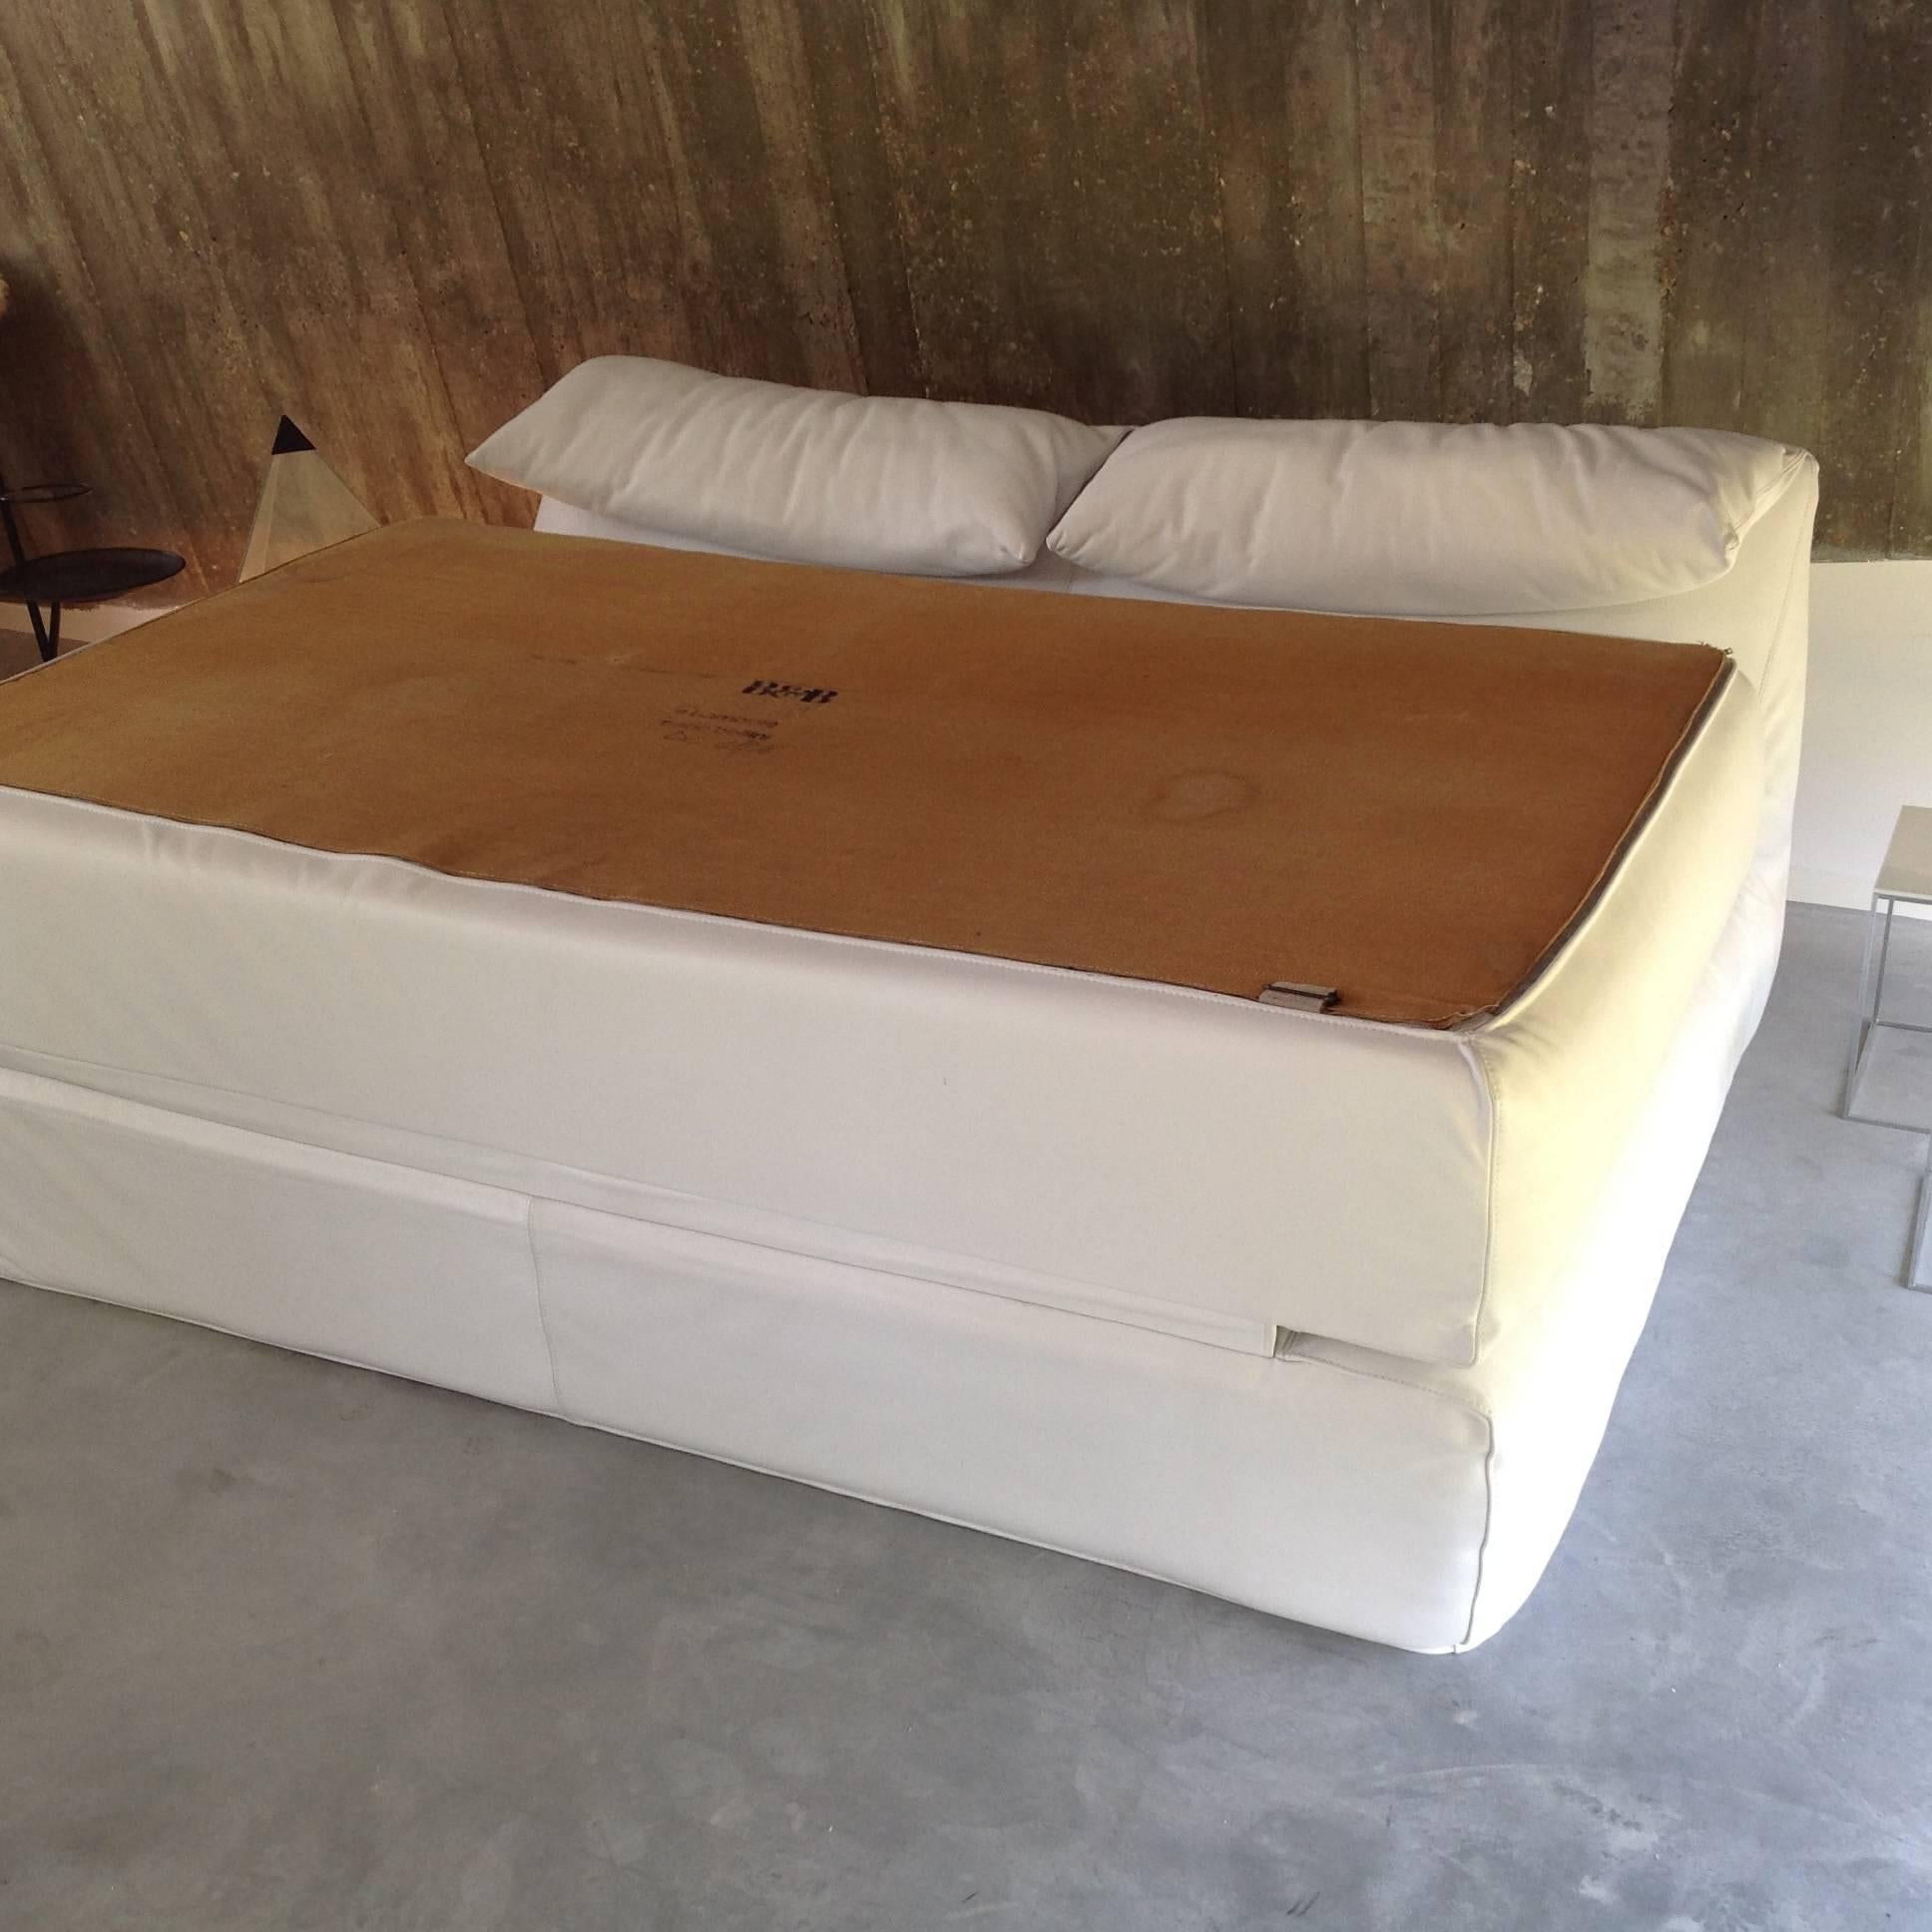 Very Exclusive Leather Day-Bed Le Bambole by Mario Bellini for B&B, Italia, 1970 For Sale 2